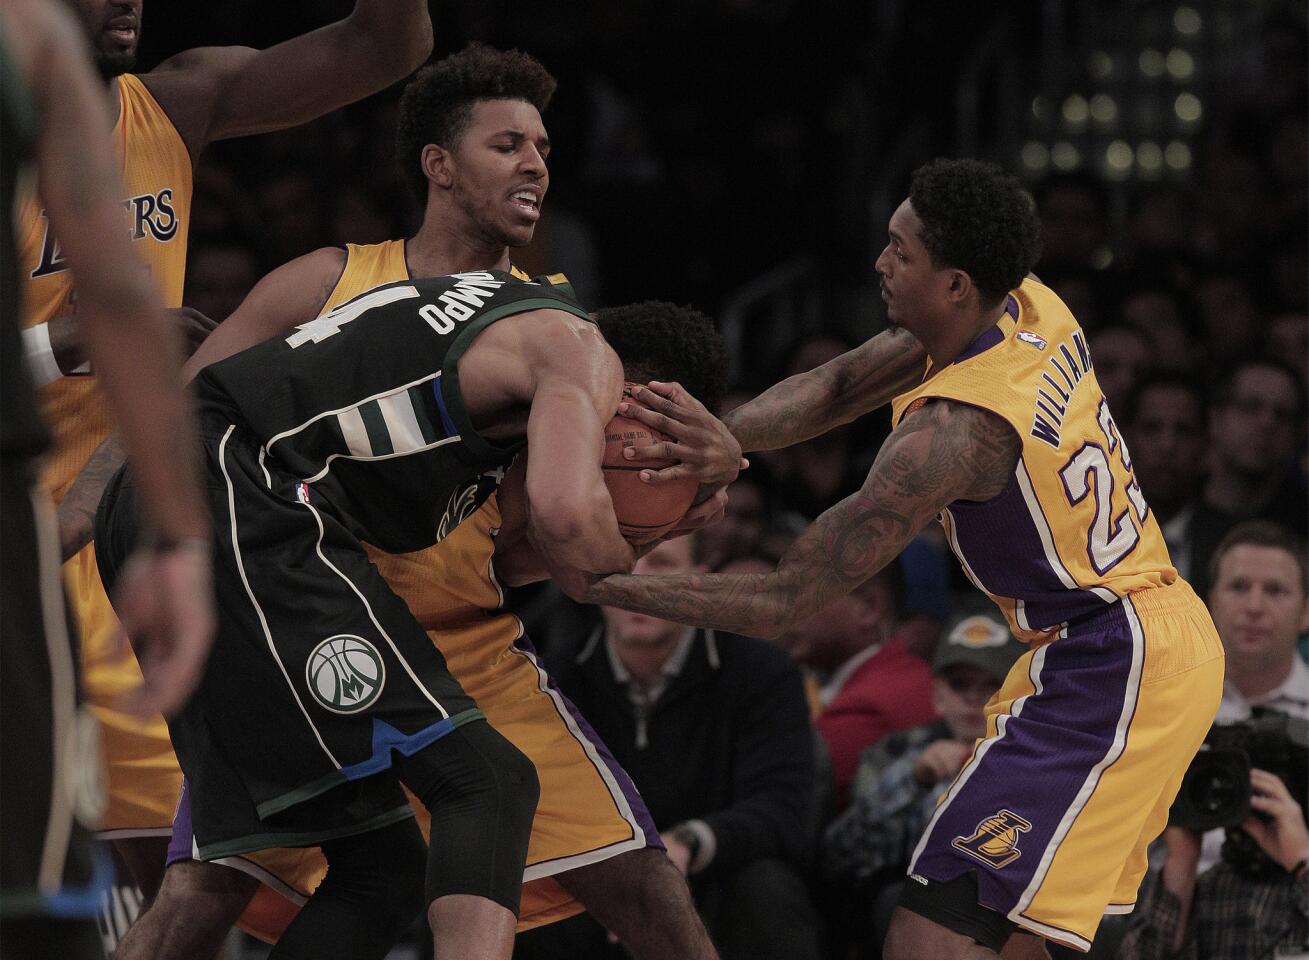 Los Angeles Lakers forward Nick Young (0) and guard Lou Williams (23) force a jump ball after tying up Milwaukee Bucks forward Giannis Antetokounmpo in the first half at Staples Center on Tuesday.